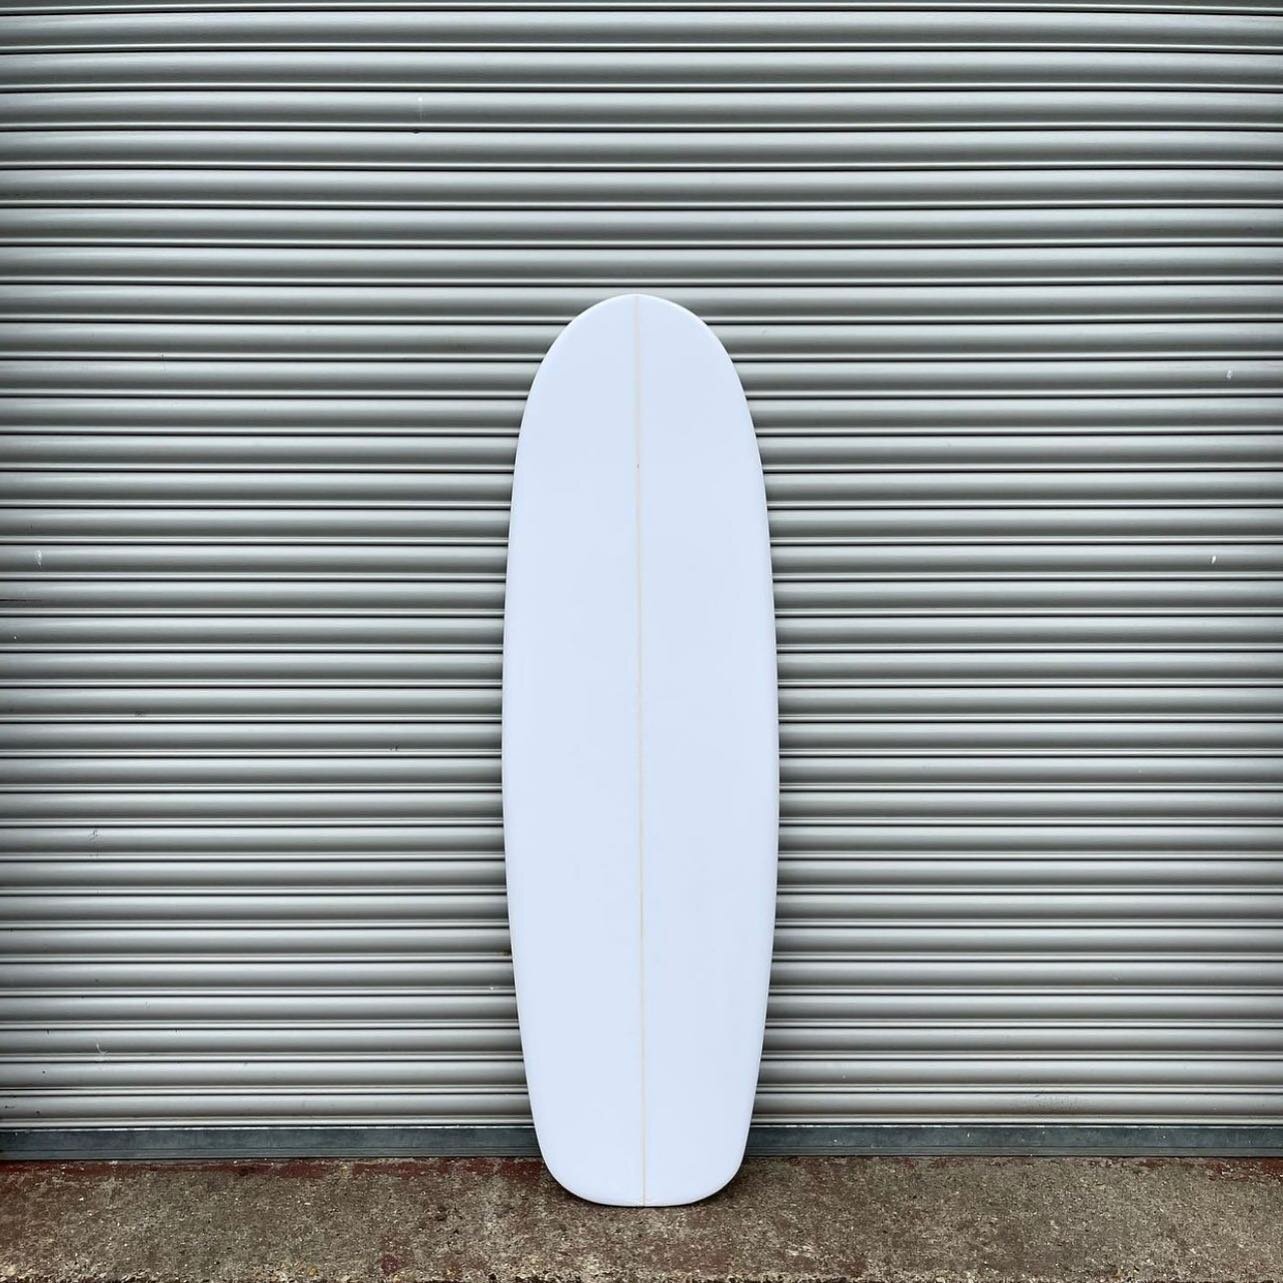 available from the end of the week - 6.2 Spoon MK3 wrapped in 8oz Volan with 6oz patches 👀 mellow contours for full speed in any conditions. Get in quick before we take her for a shred .. it&rsquo;s on the cards 🏴&zwj;☠️

#ahoysurfcraft #spoon